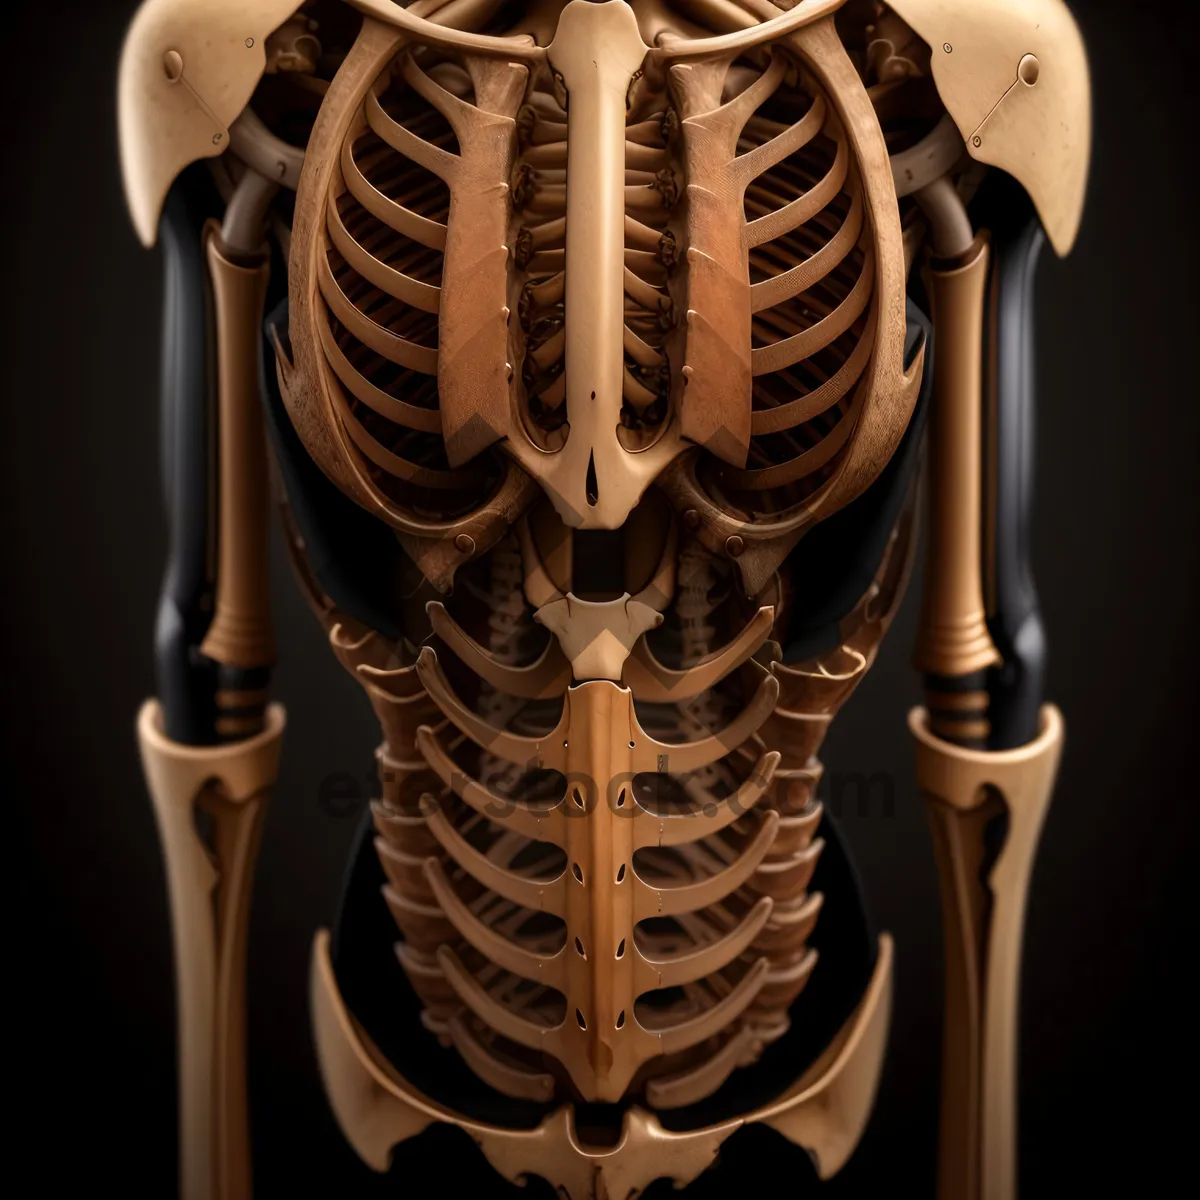 Picture of Anatomical Human Skeleton X-Ray: Detailed 3D View of Body's Central Structure